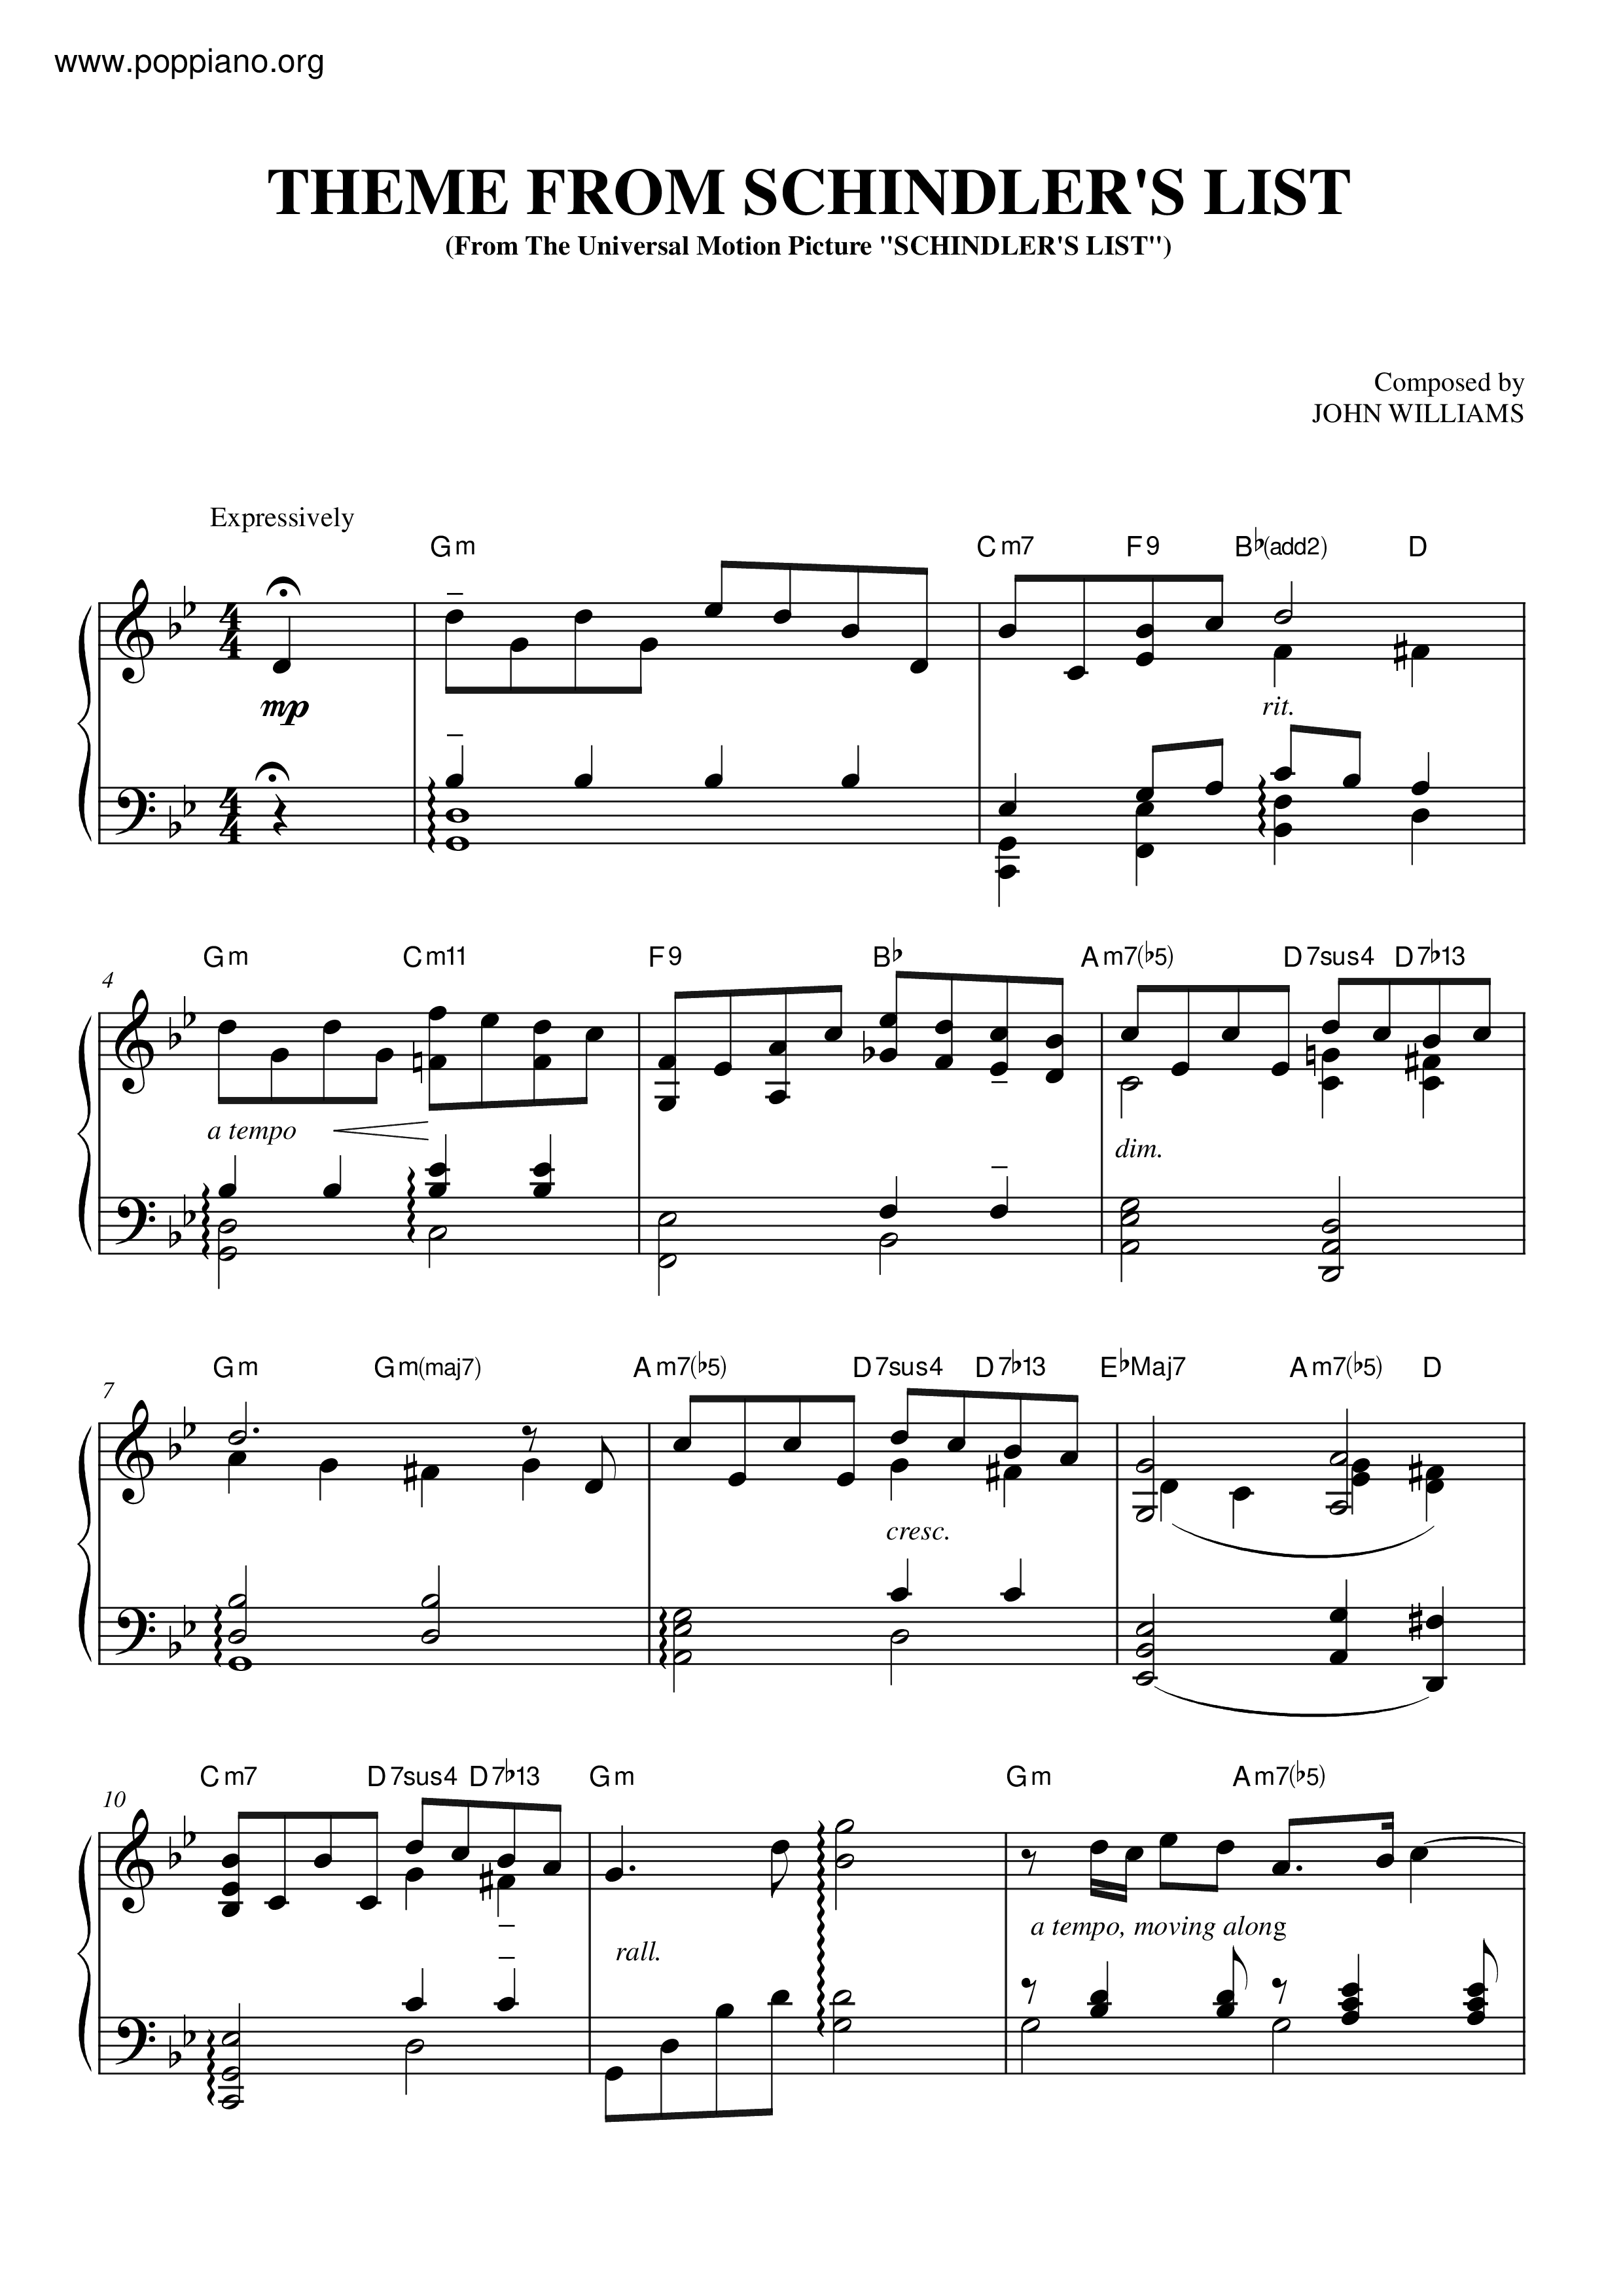 Theme From Schindler's List Score